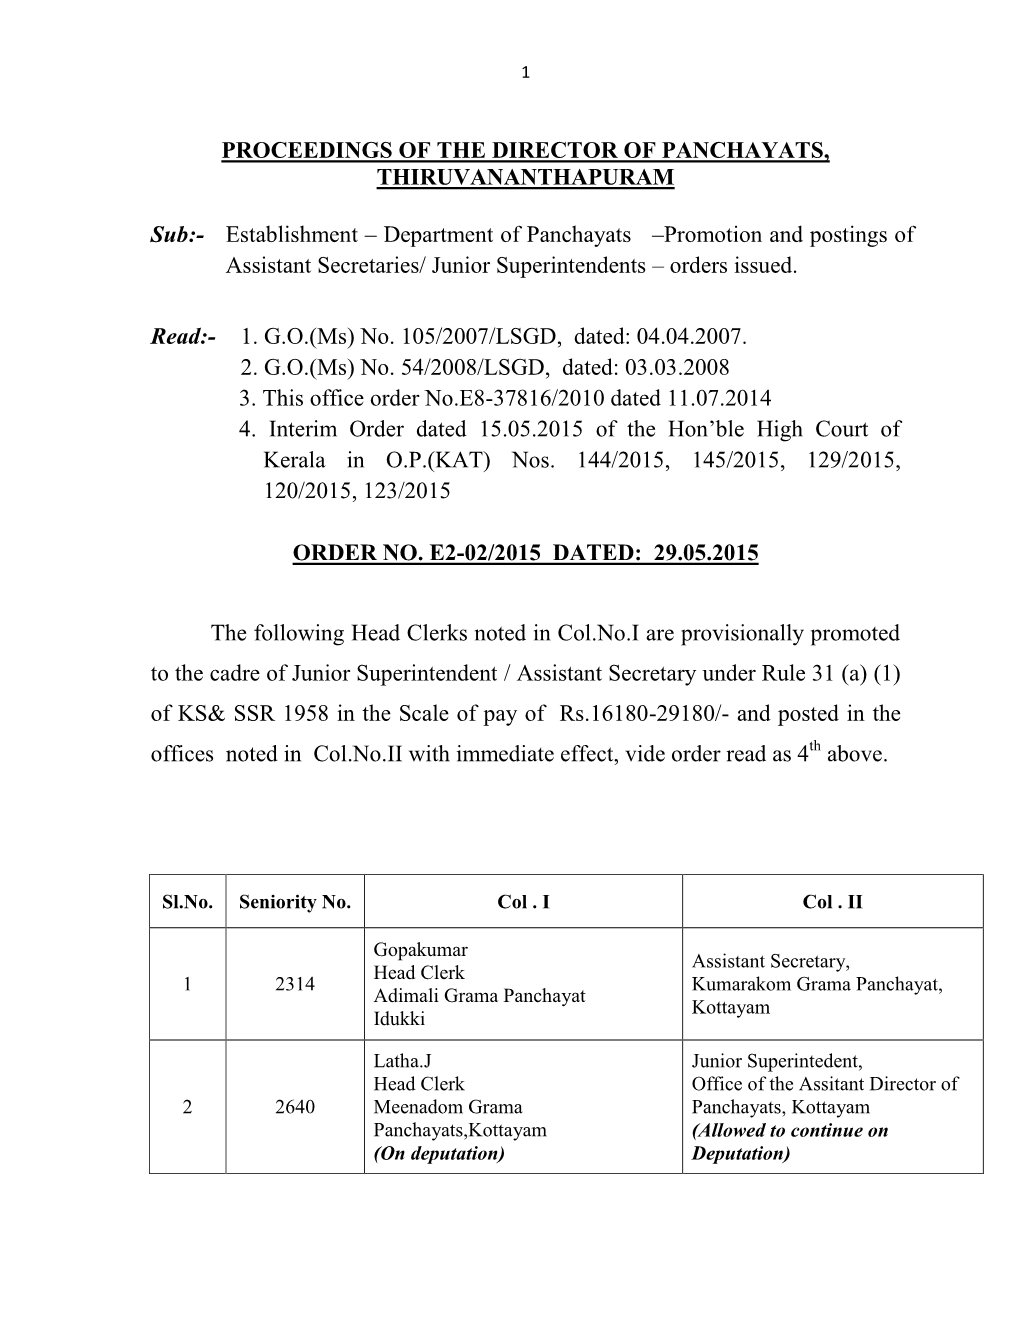 Department of Panchayats –Promotion and Postings of Assistant Secretaries/ Junior Superintendents – Orders Issued